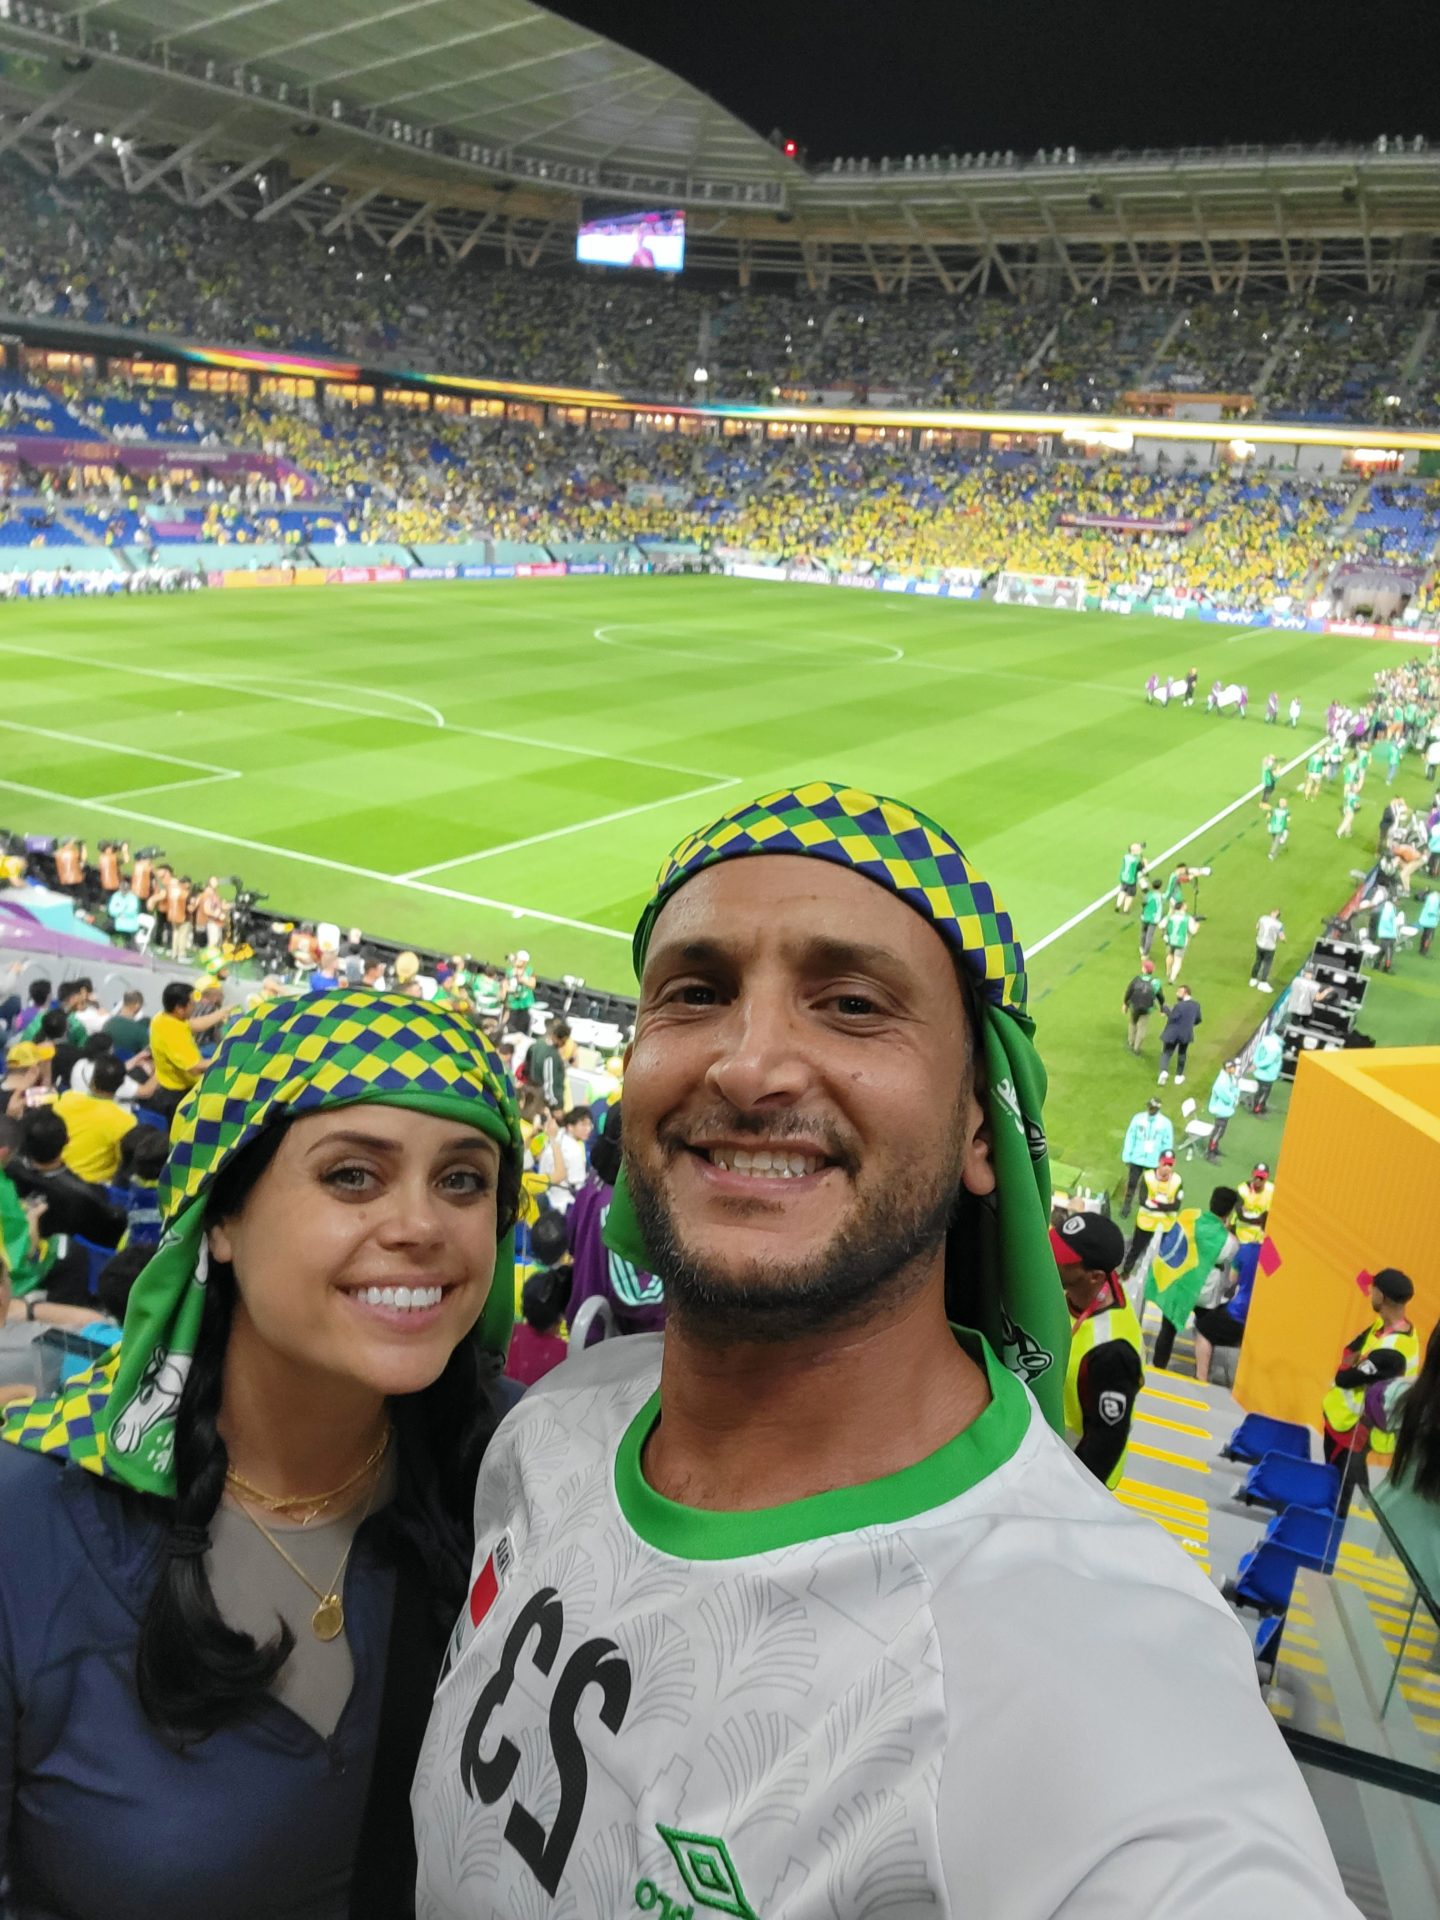 a man and woman taking a selfie in a stadium